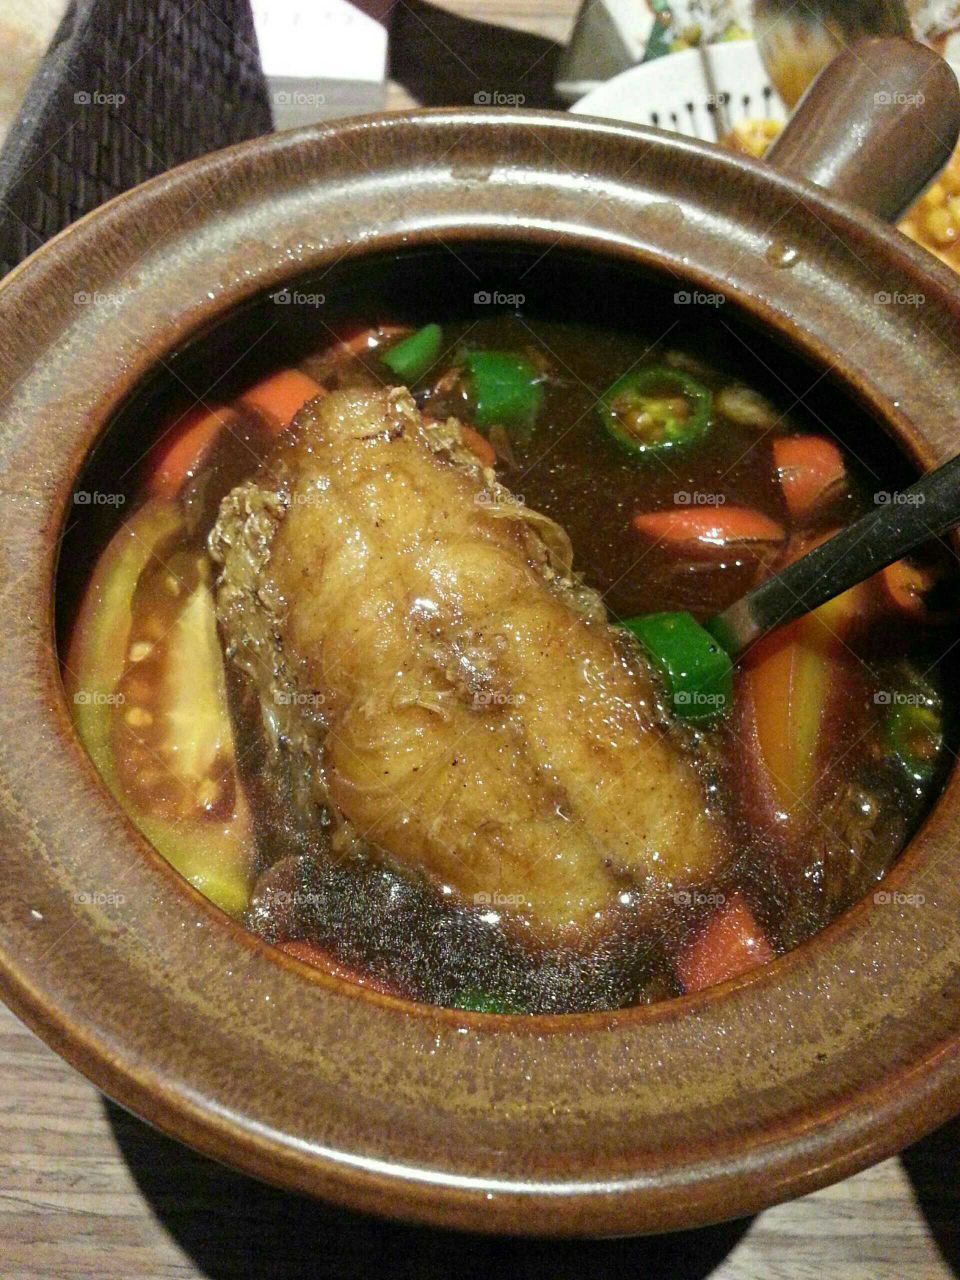 Pindang Fish Soup; The sweet and sour taste of the soup is really delicious especially when it is hot